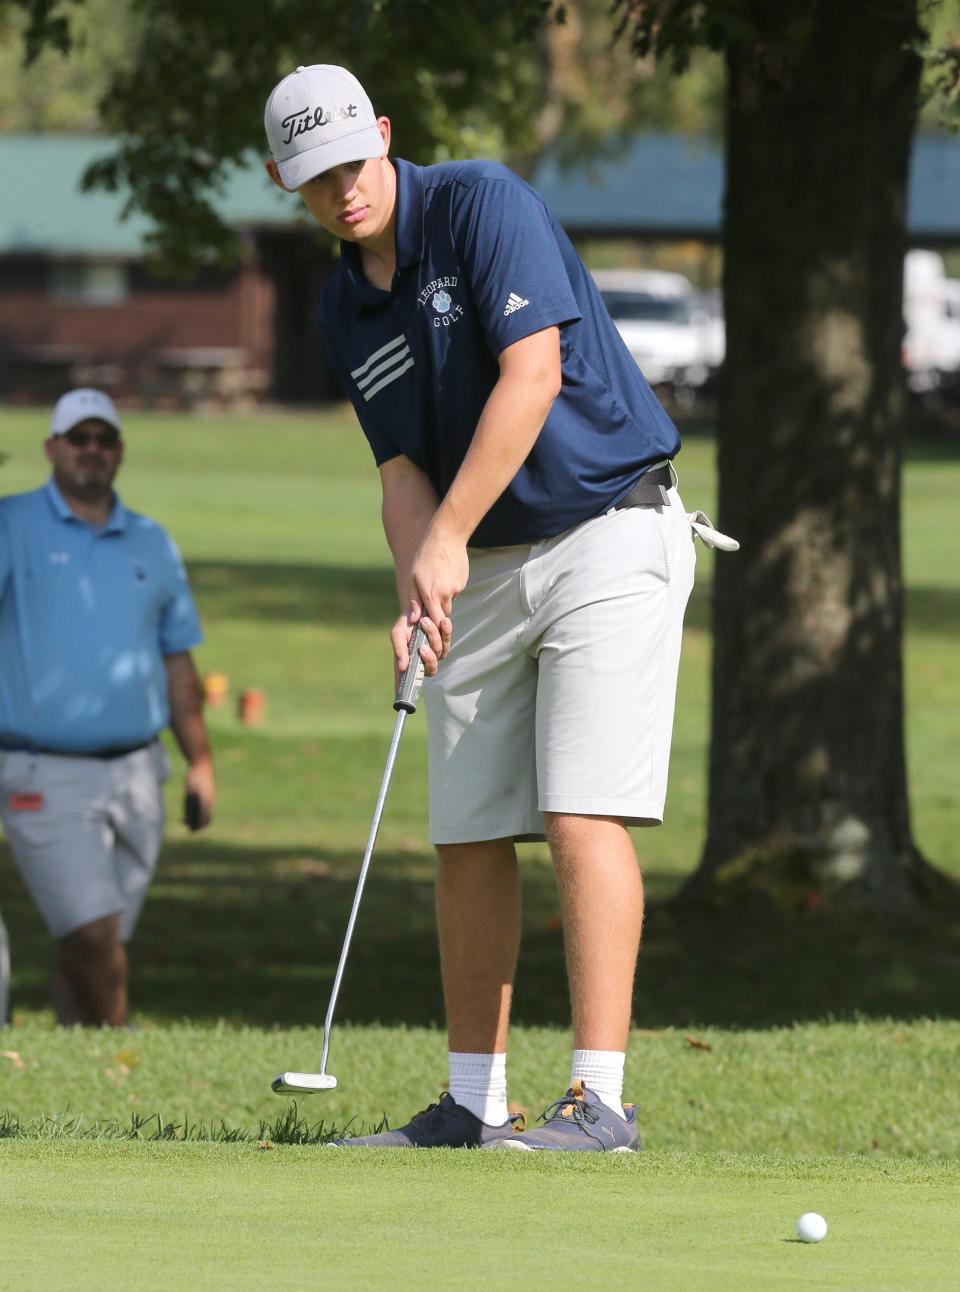 Jack Mayle of Louisville putts on the third hole during the DI sectional boys golf tournament at Tannenhauf Golf Club on Tuesday, Oct. 5, 2021.